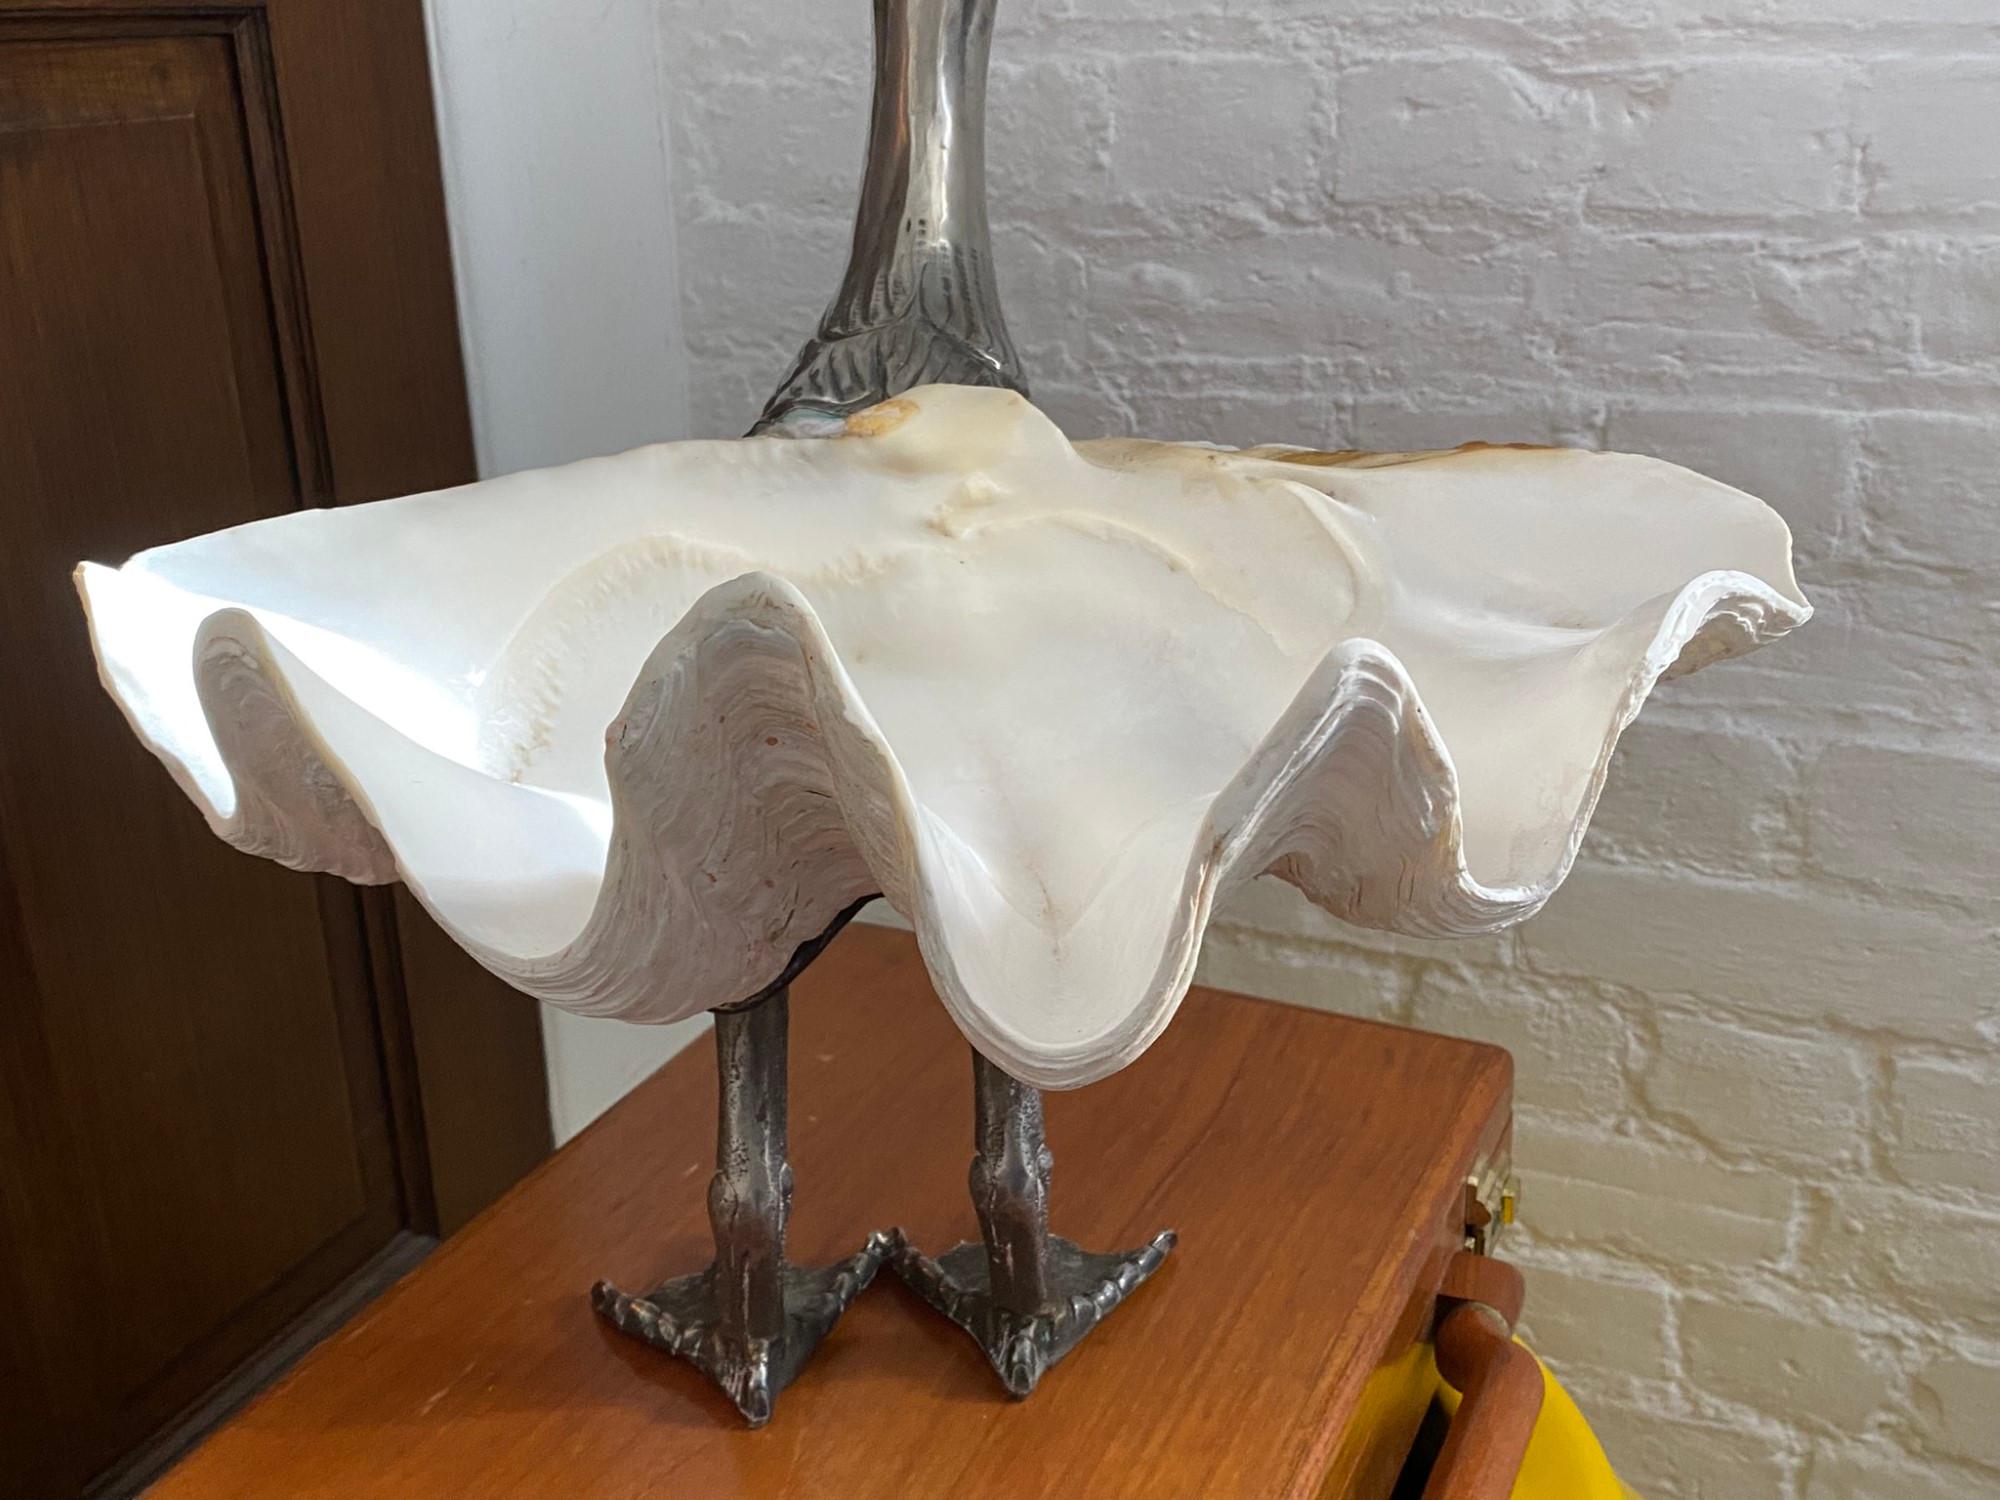 Midcentury Bird Sculpture by Gabriella Binazzi with Giant Clam Shell, Italian 2